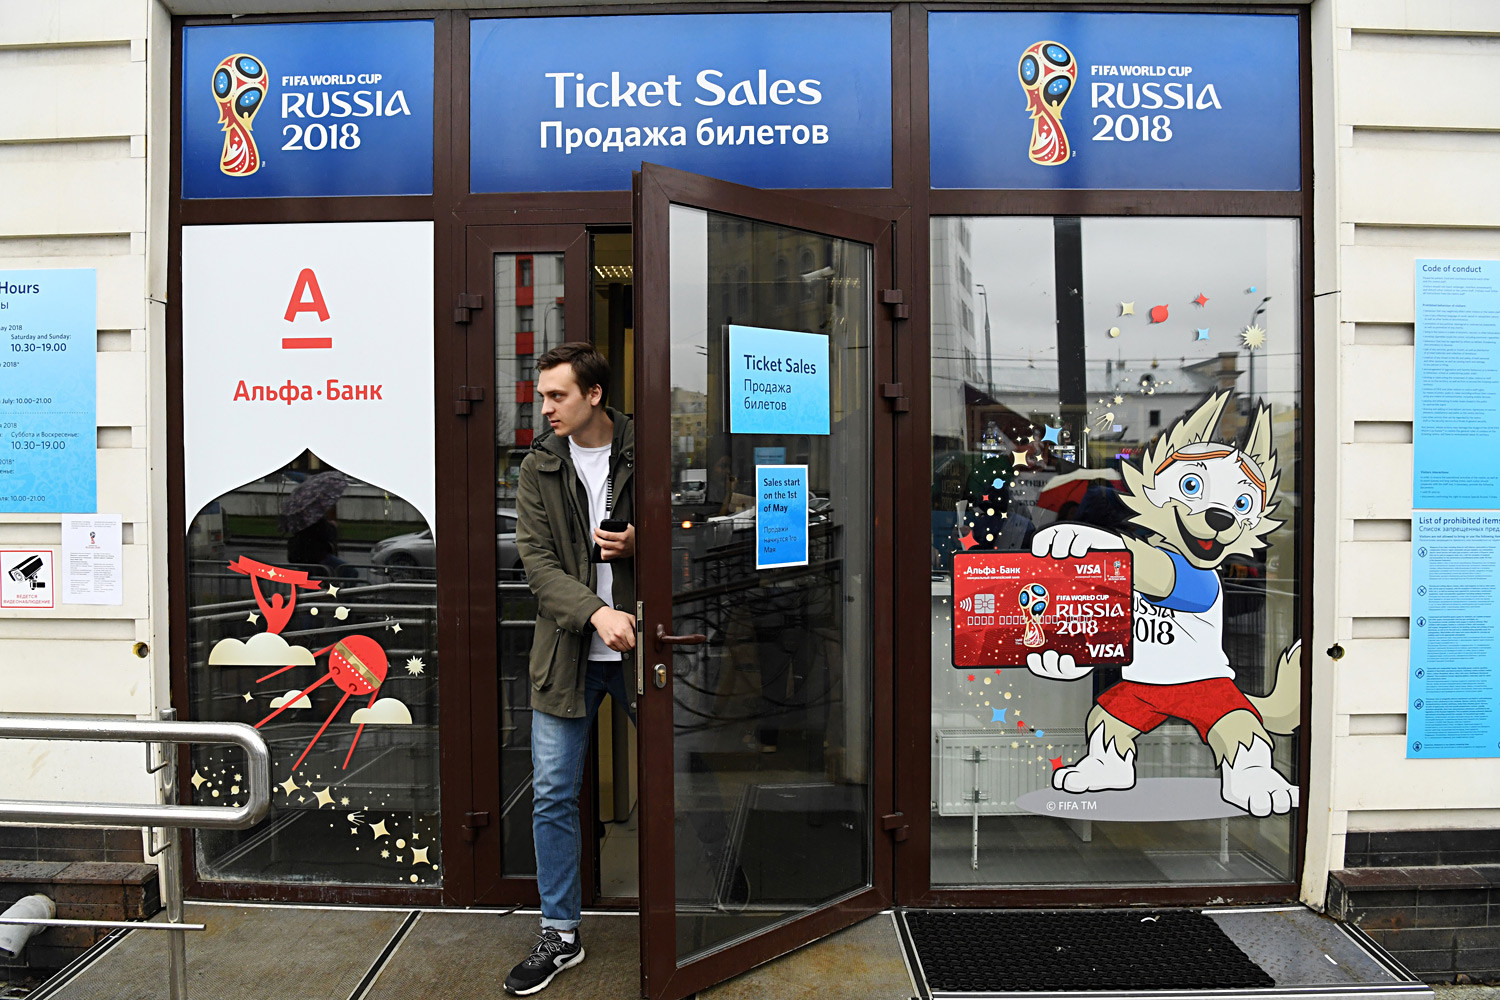 WORLDCUP Russia how to buy ticket 2018.